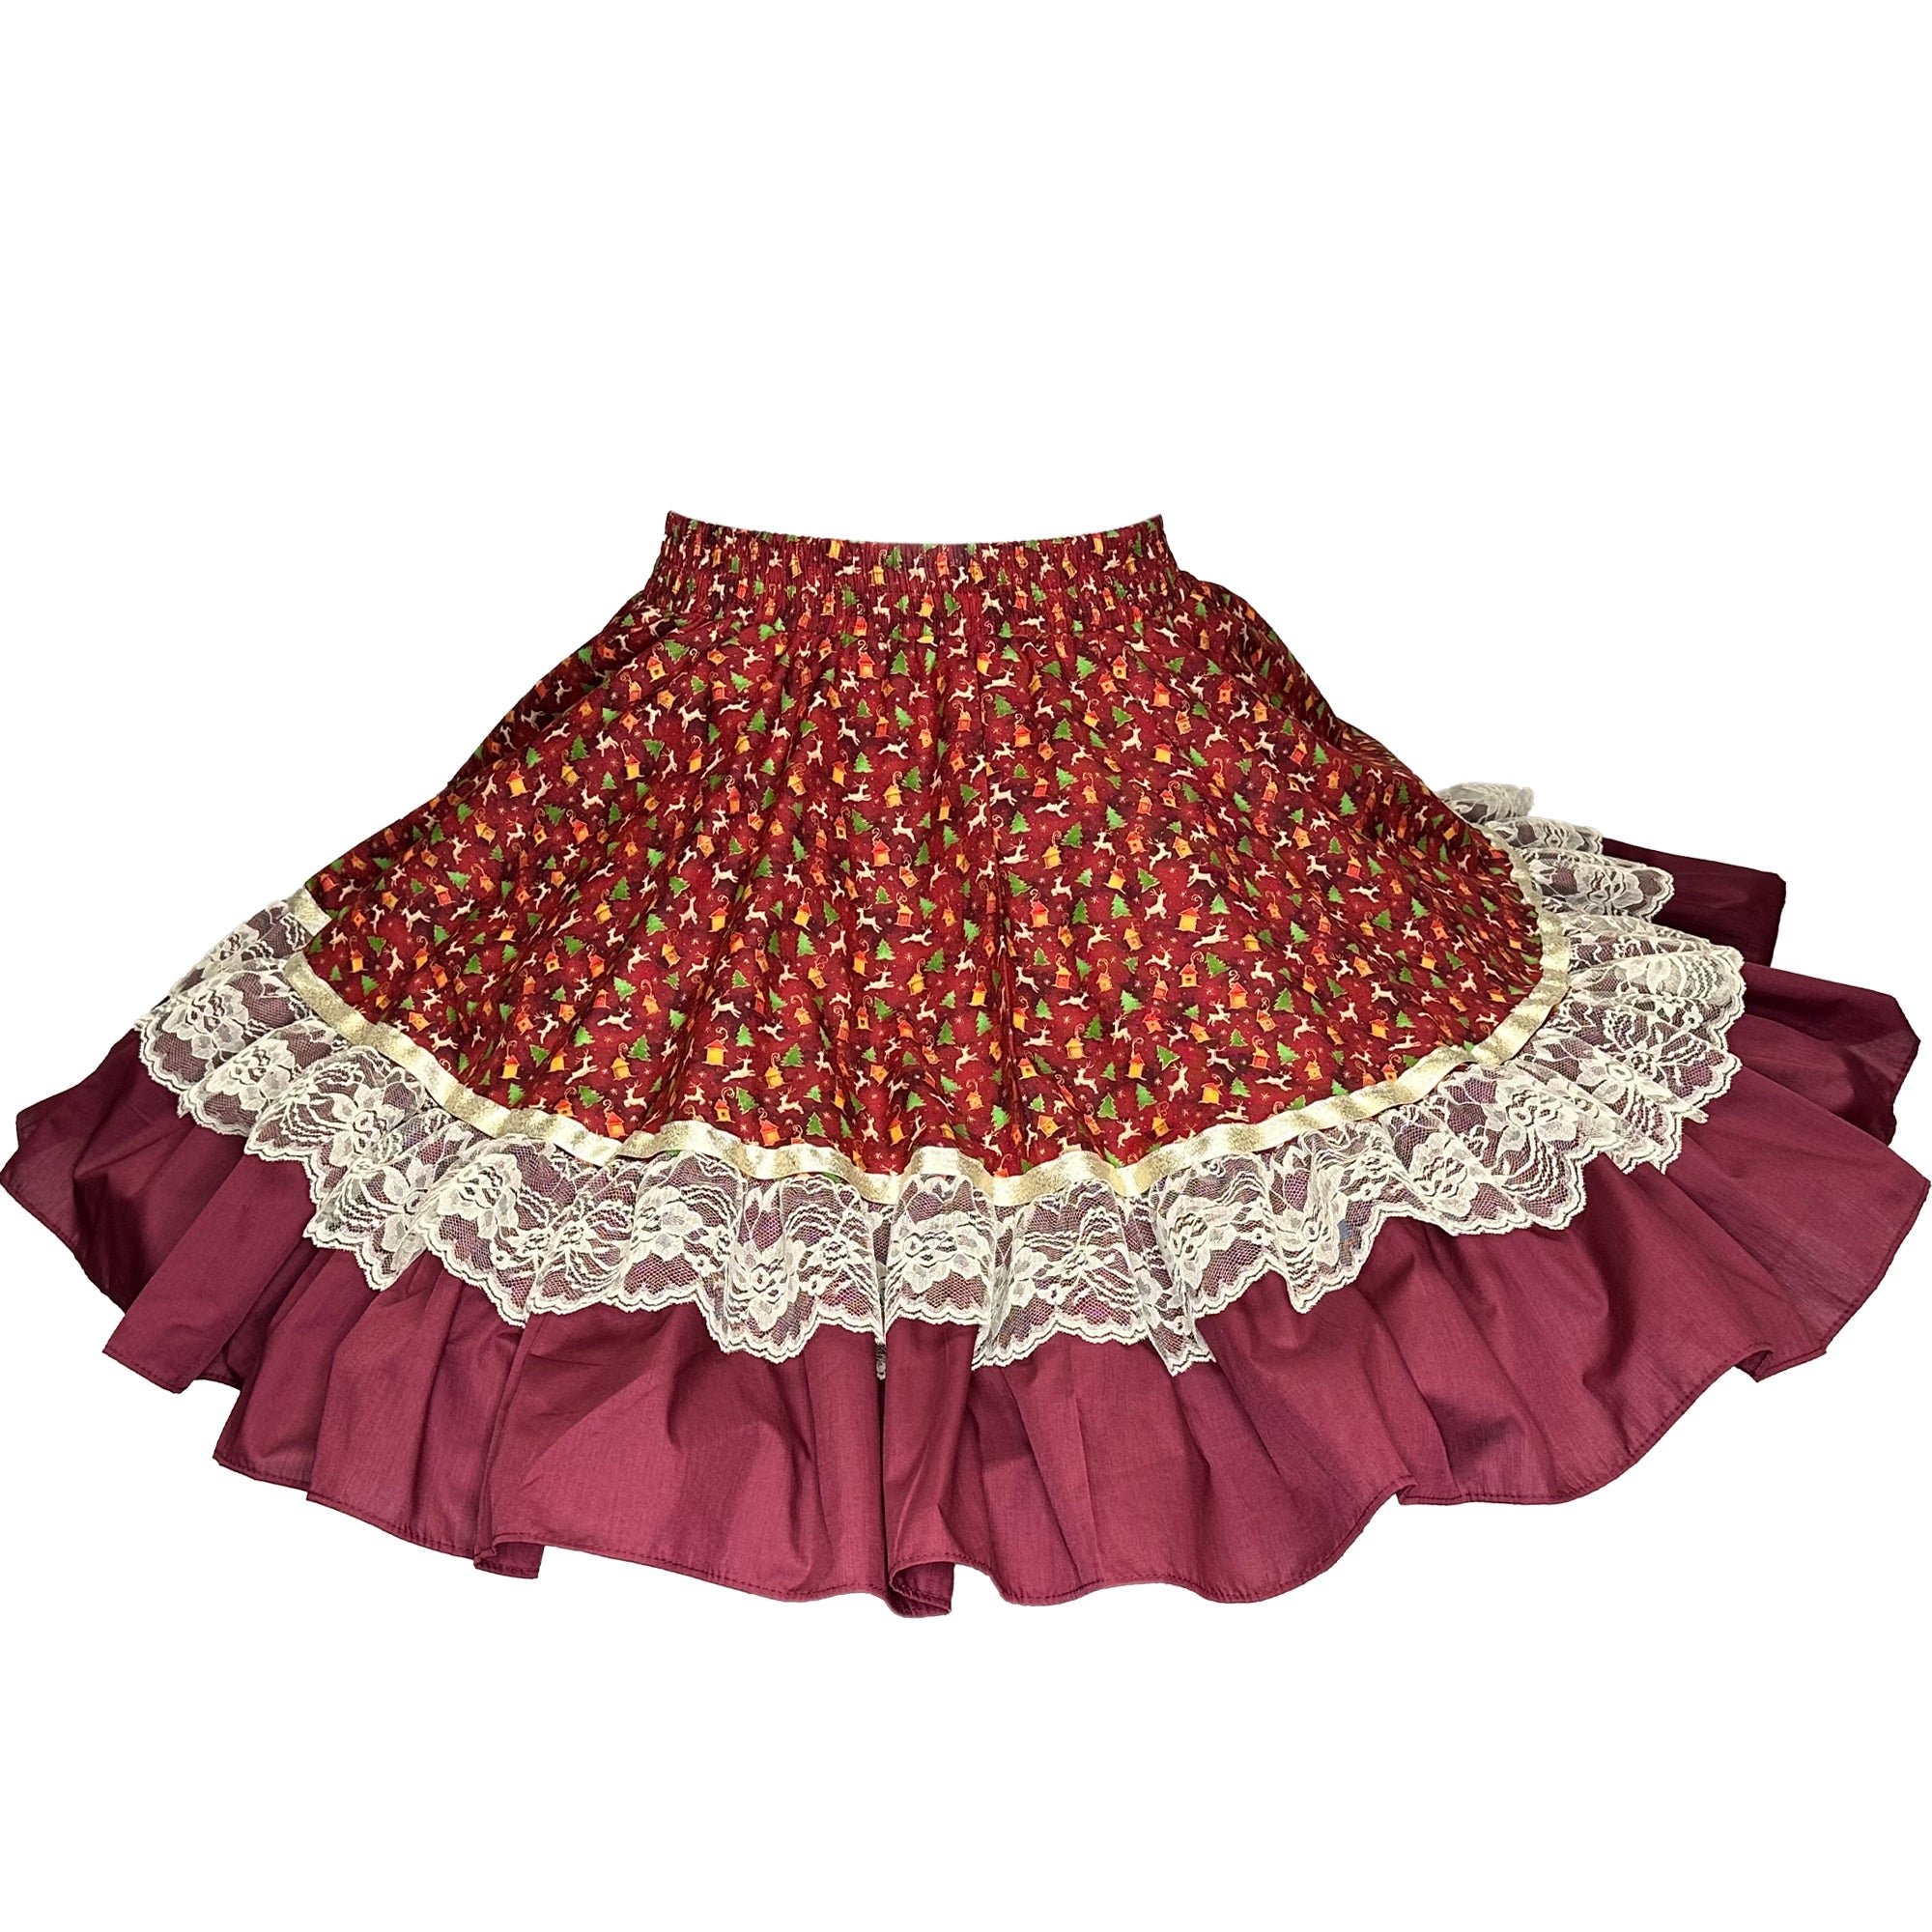 A Reindeer Square Dance Skirt in red and white, perfect for a Christmas outfit from Square Up Fashions.